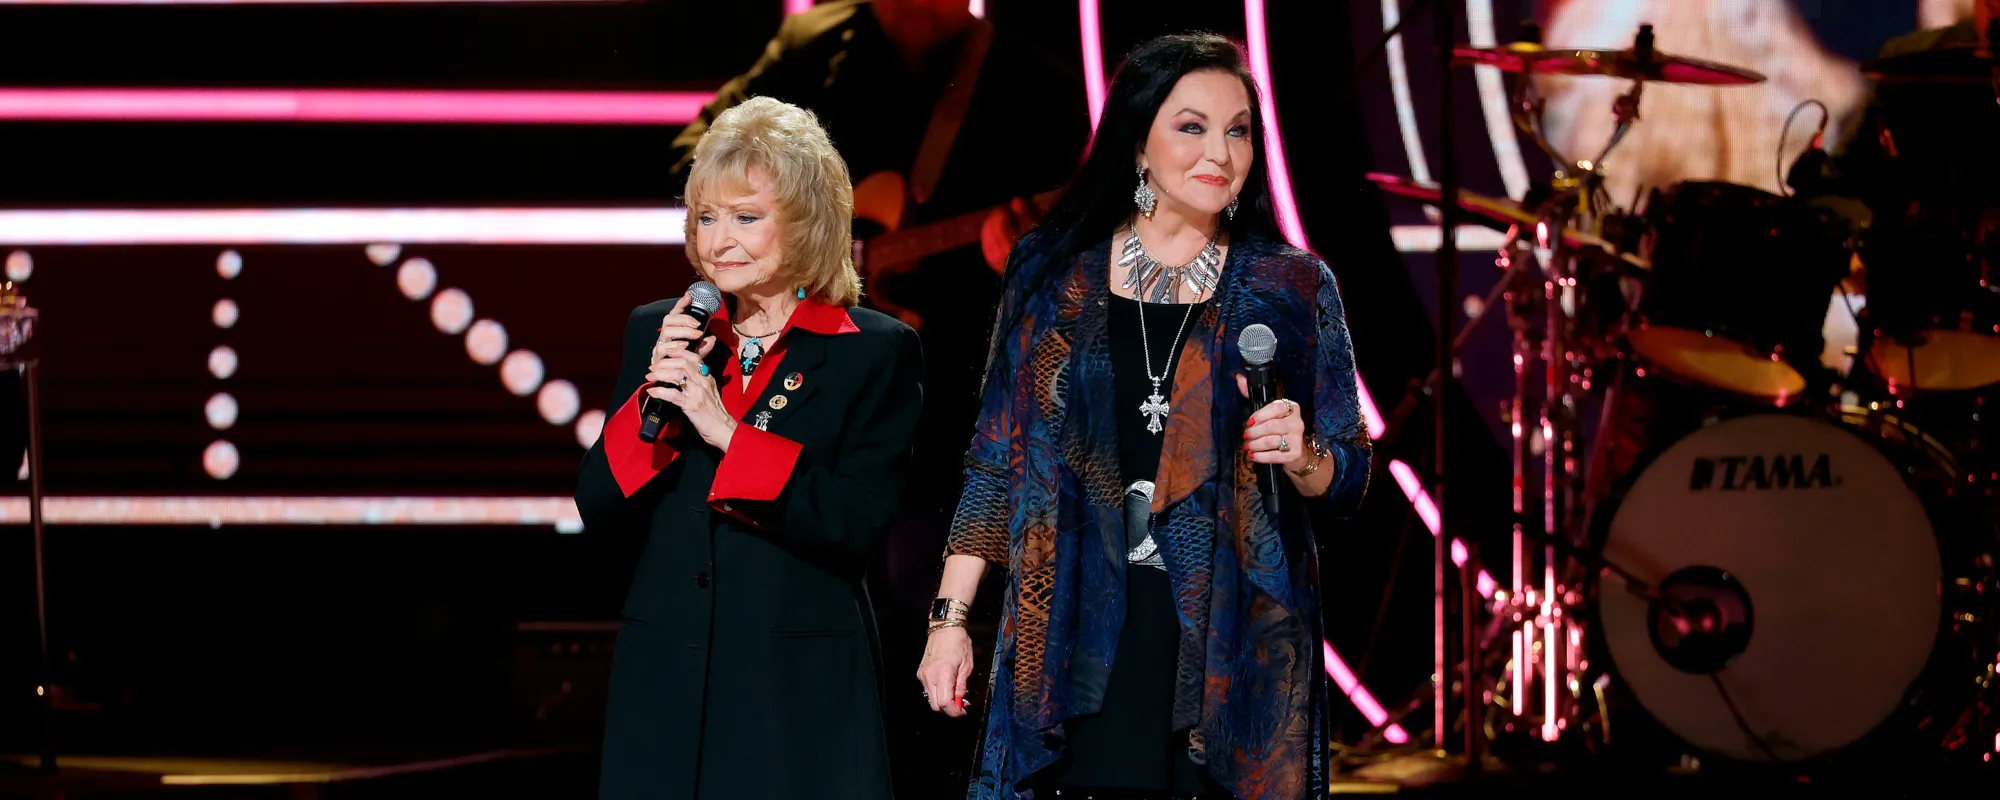 Crystal Gayle and Peggy Sue Honor Sister Loretta Lynn with Performance of “Coal Miner’s Daughter”